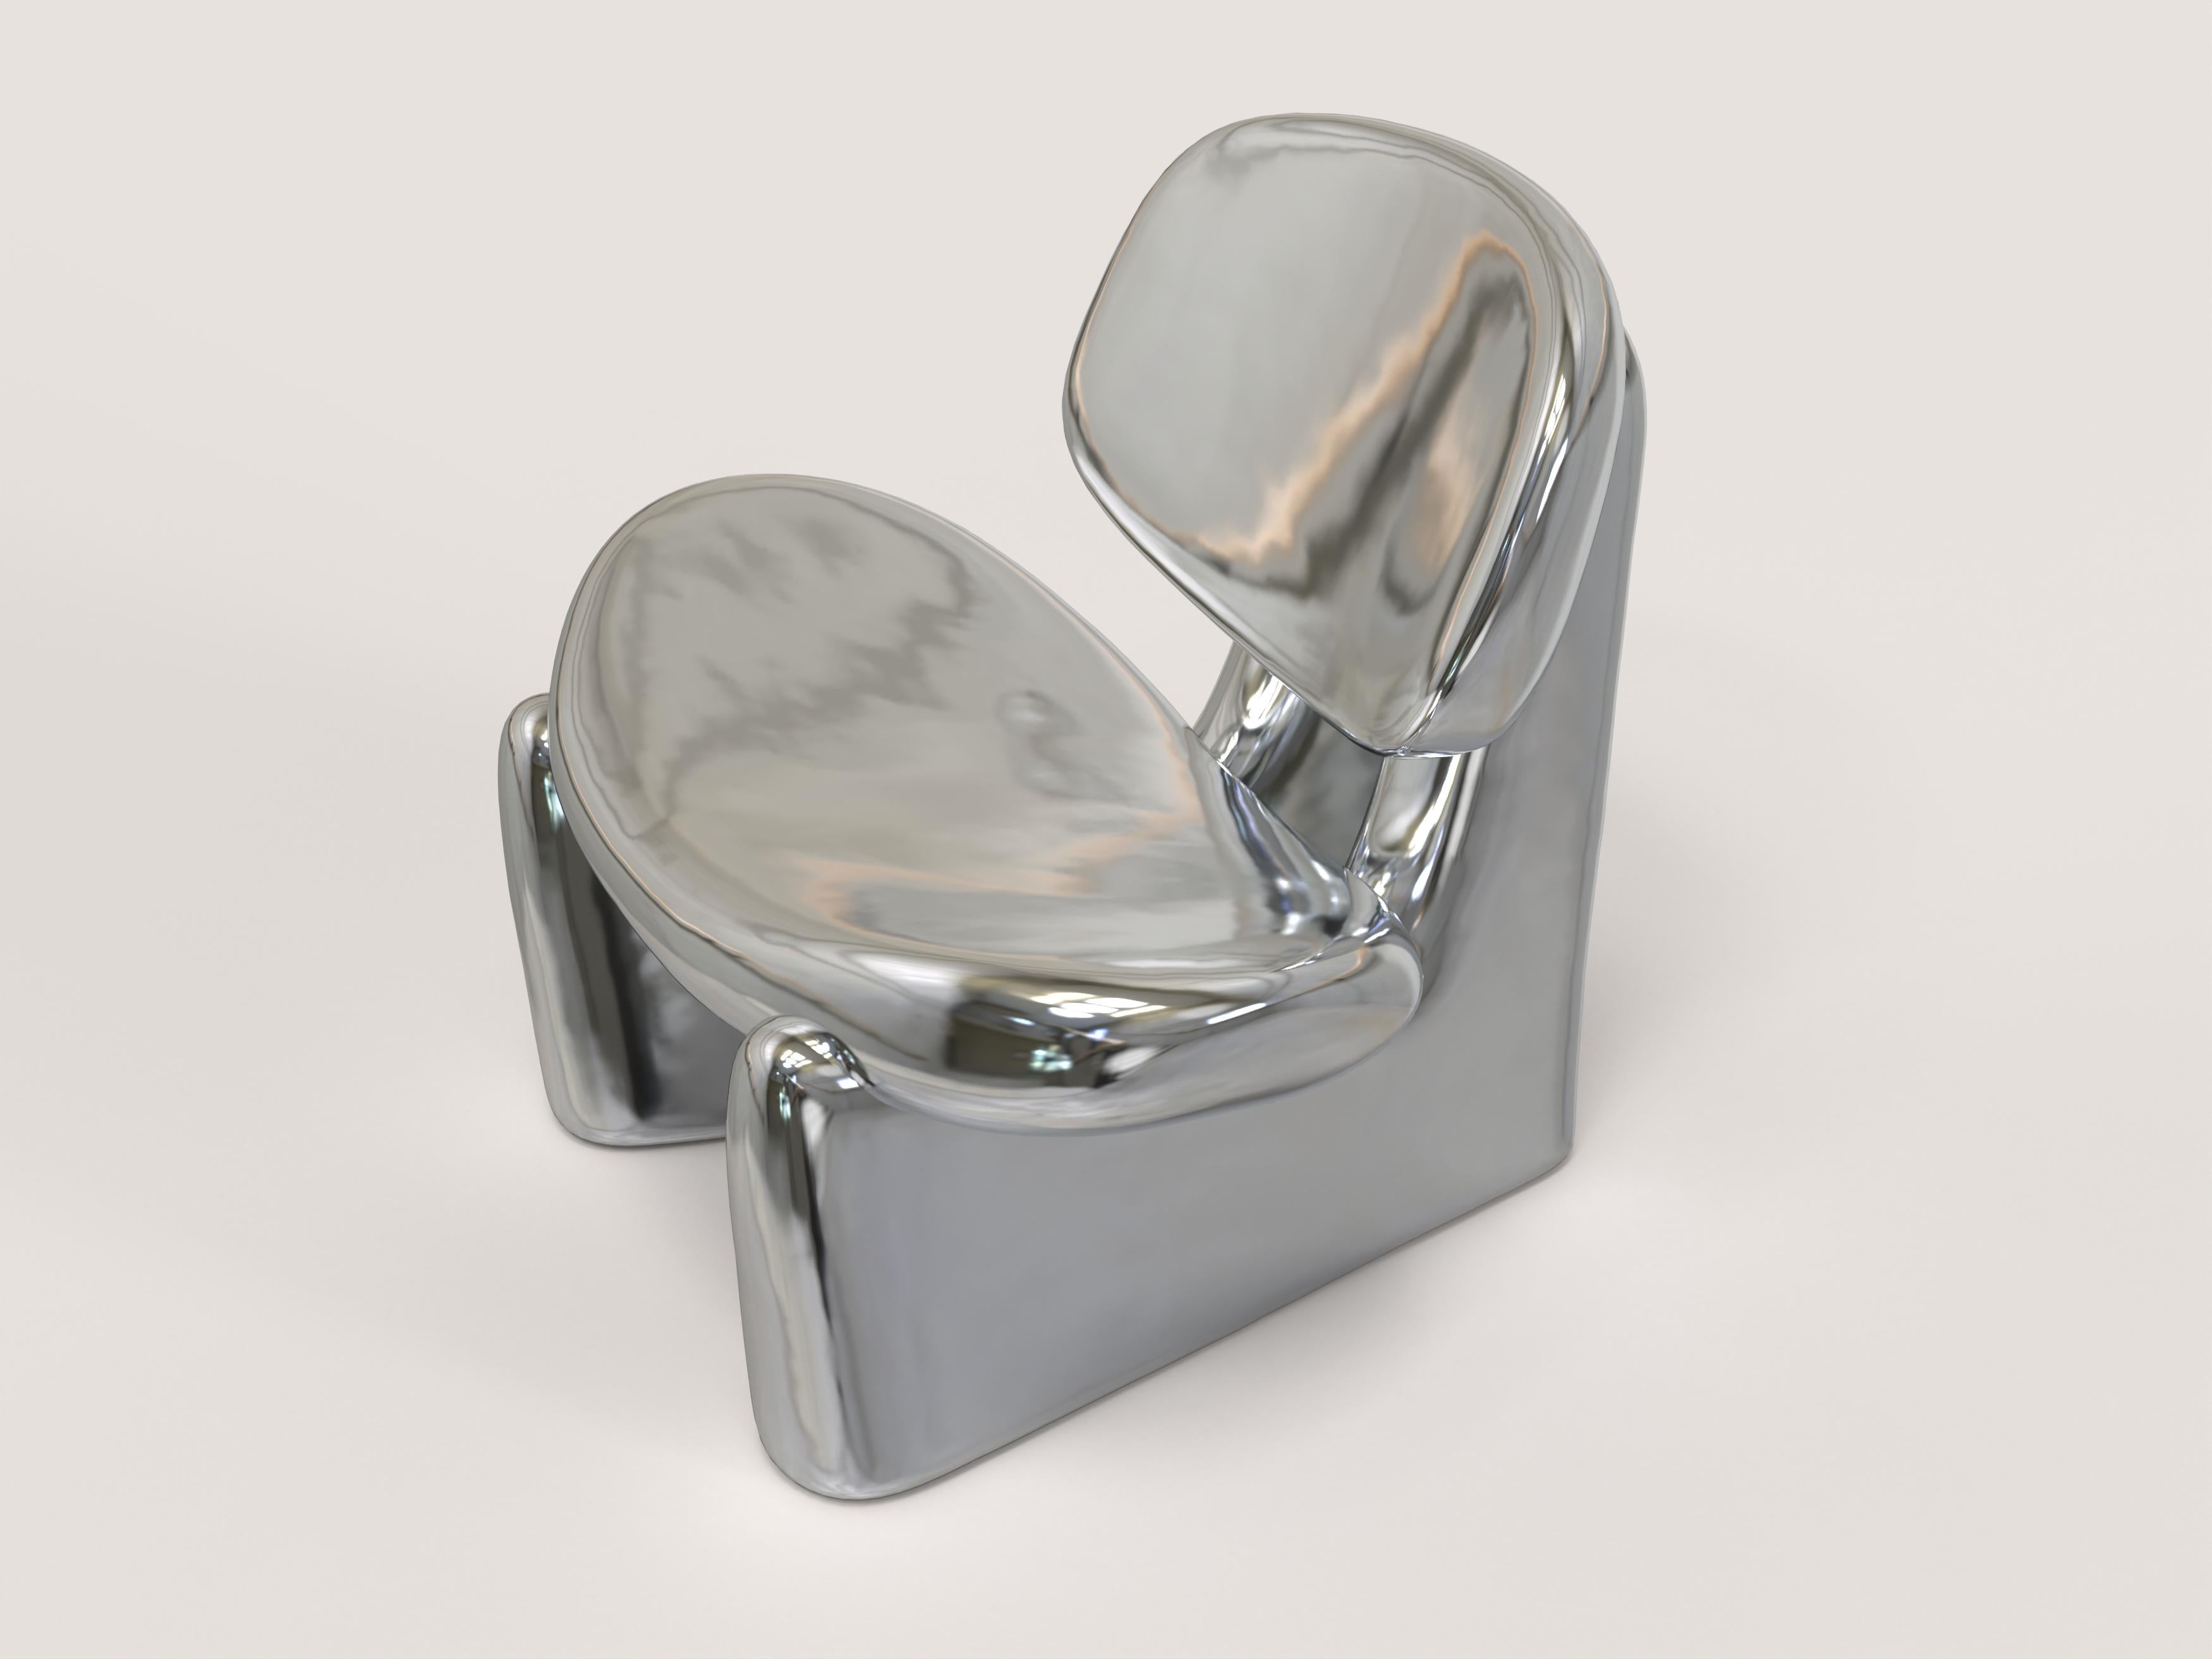 Polystyrene Contemporary Limited Edition Signed Armchair, Pau Silver V1 by Edizione Limitata For Sale